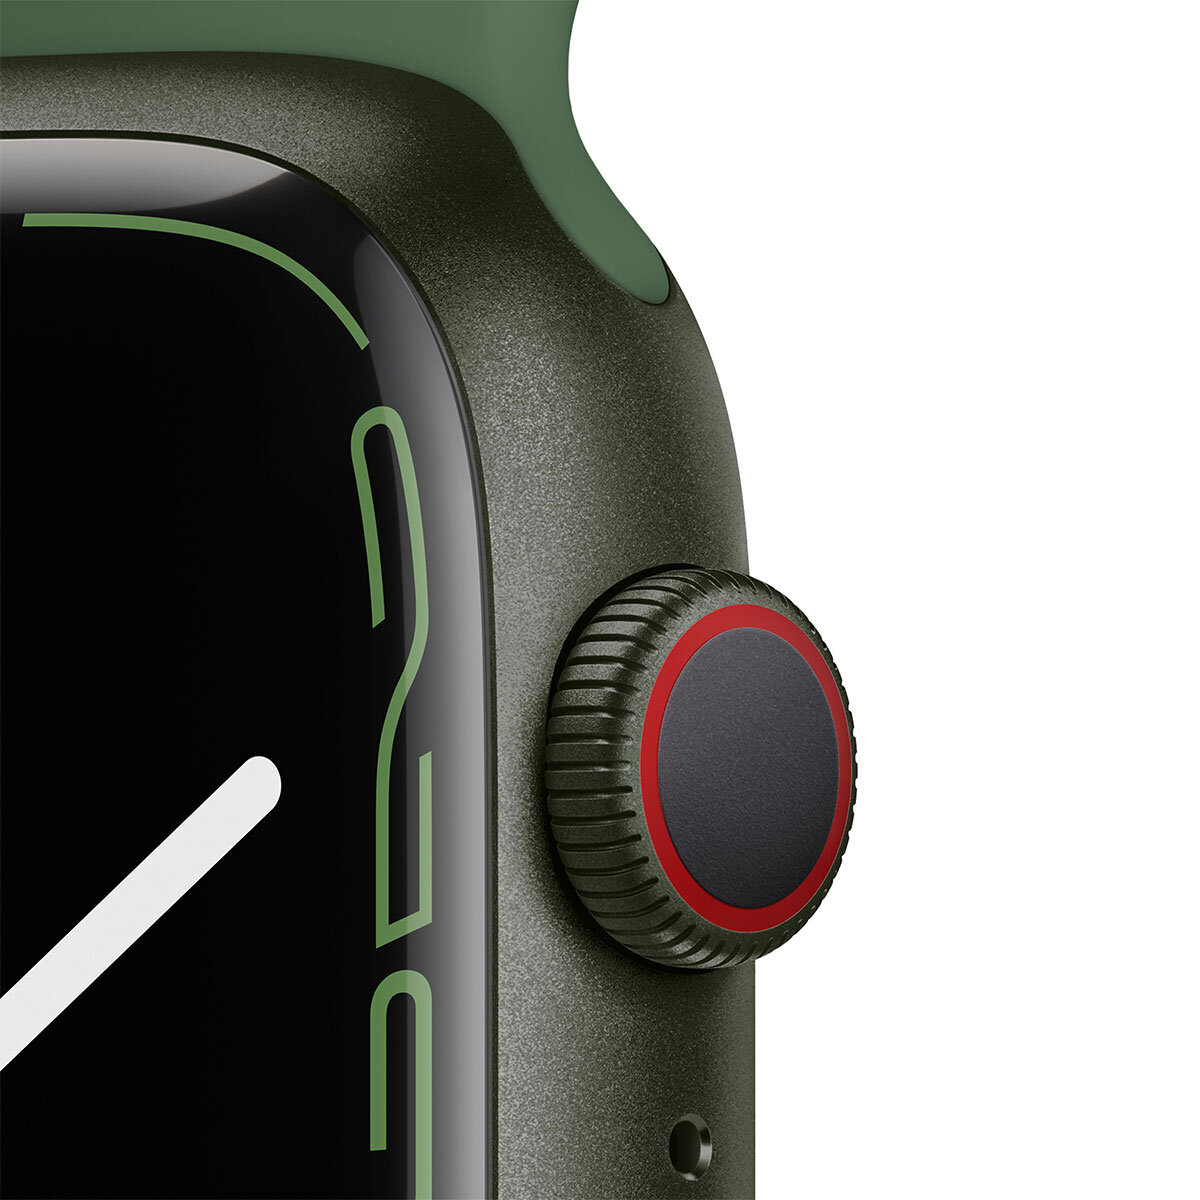 Buy Apple Watch Series 7 GPS + Cellular, 45mm Green Aluminium Case with Clover Sport Band, MKJR3B/A at costco.co.uk